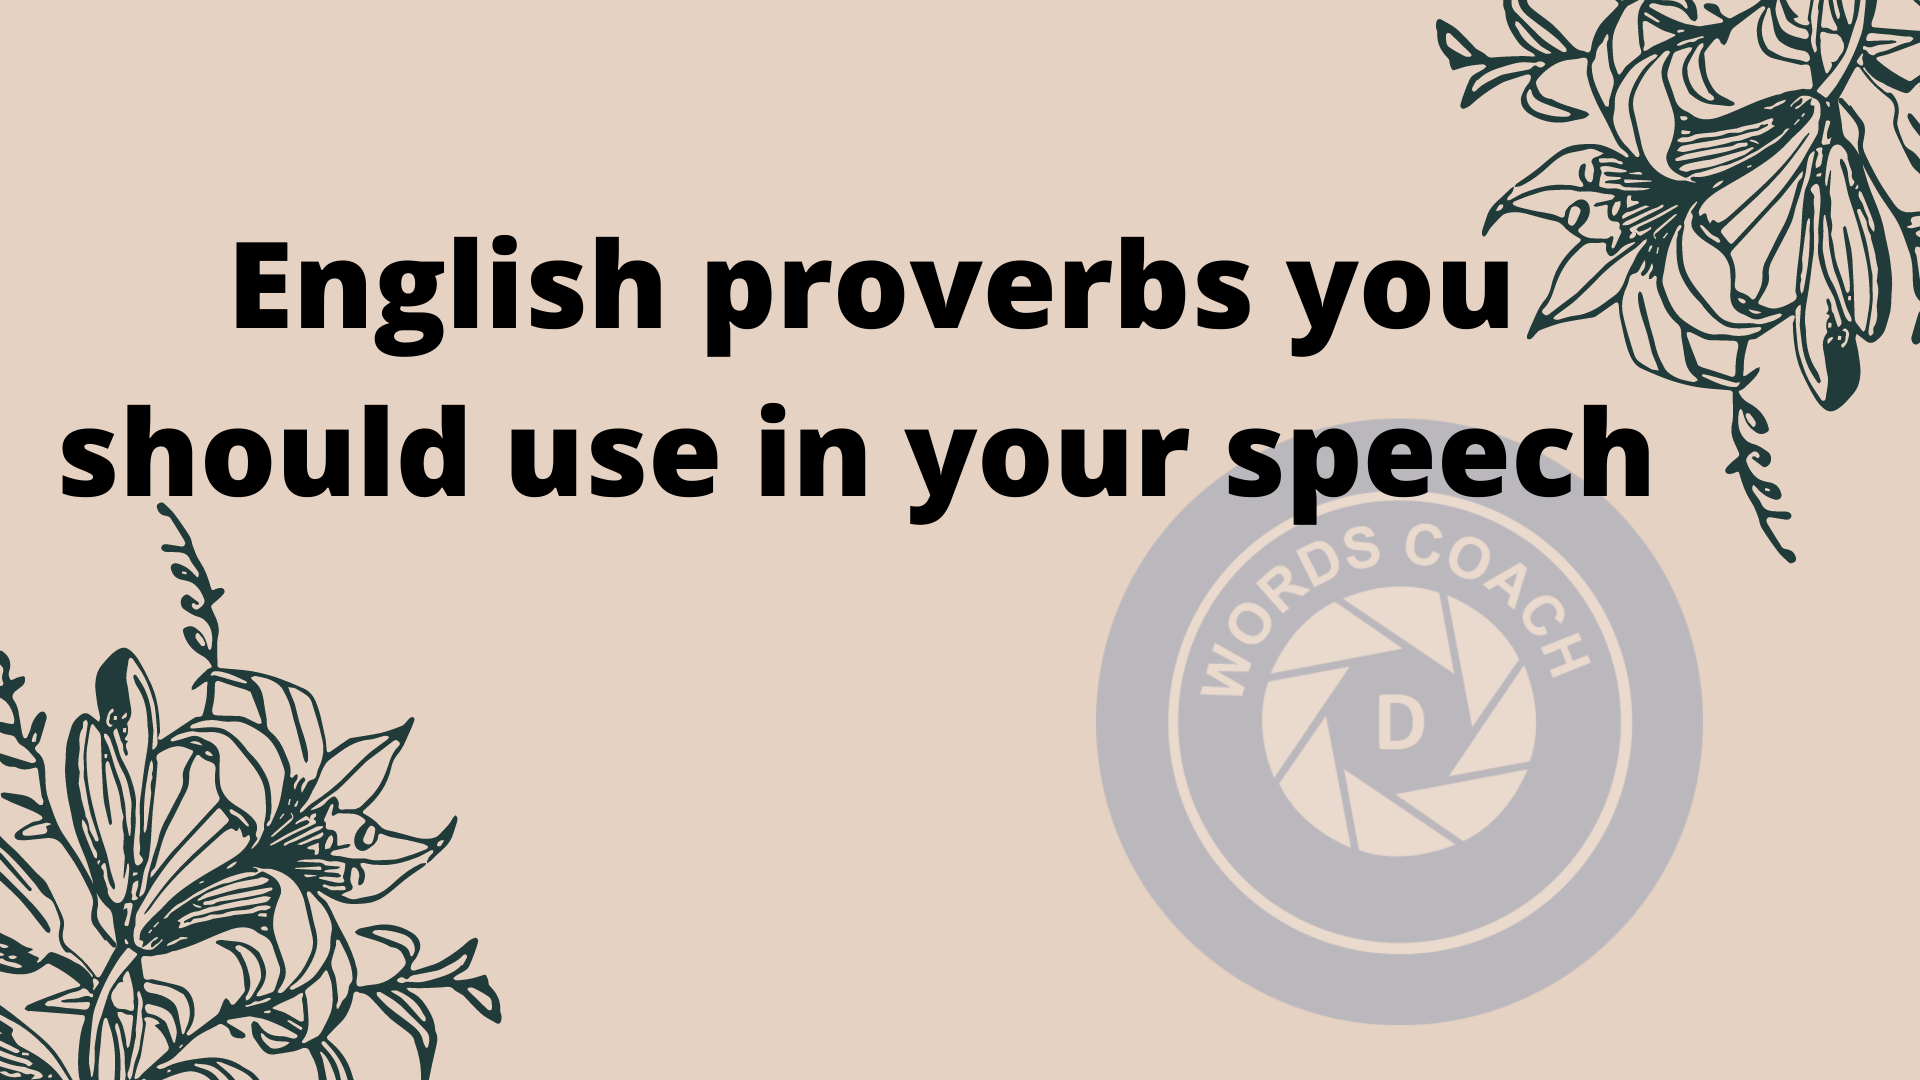 50 English proverbs you should use in your speech